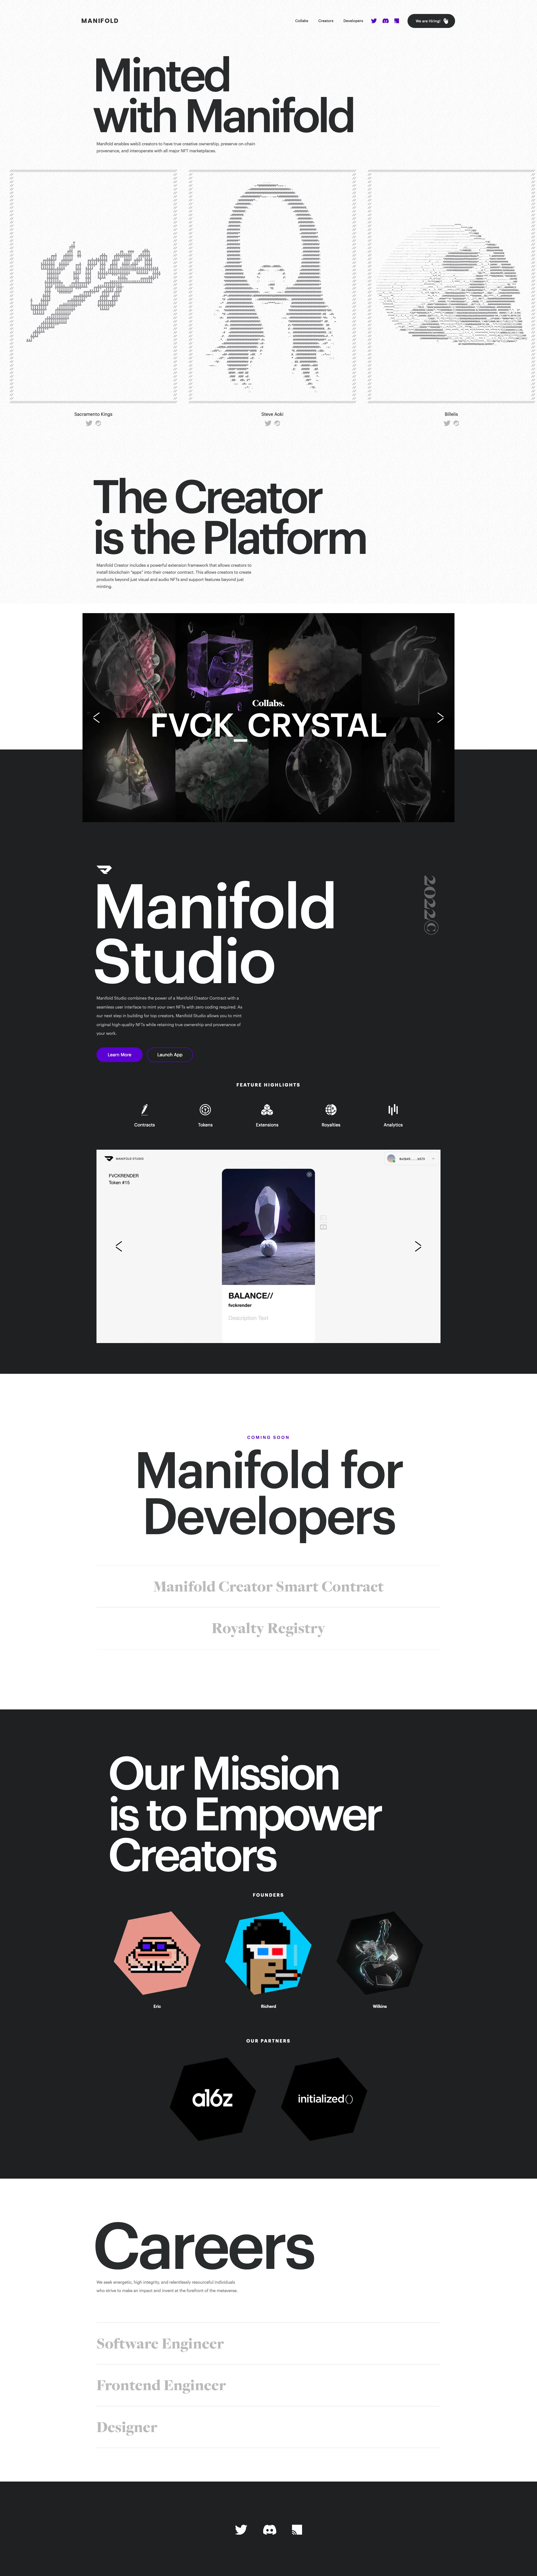 Manifold Landing Page Example: Manifold enables web3 creators to have true creative ownership, preserve on-chain provenance, and interoperate with all major NFT marketplaces.